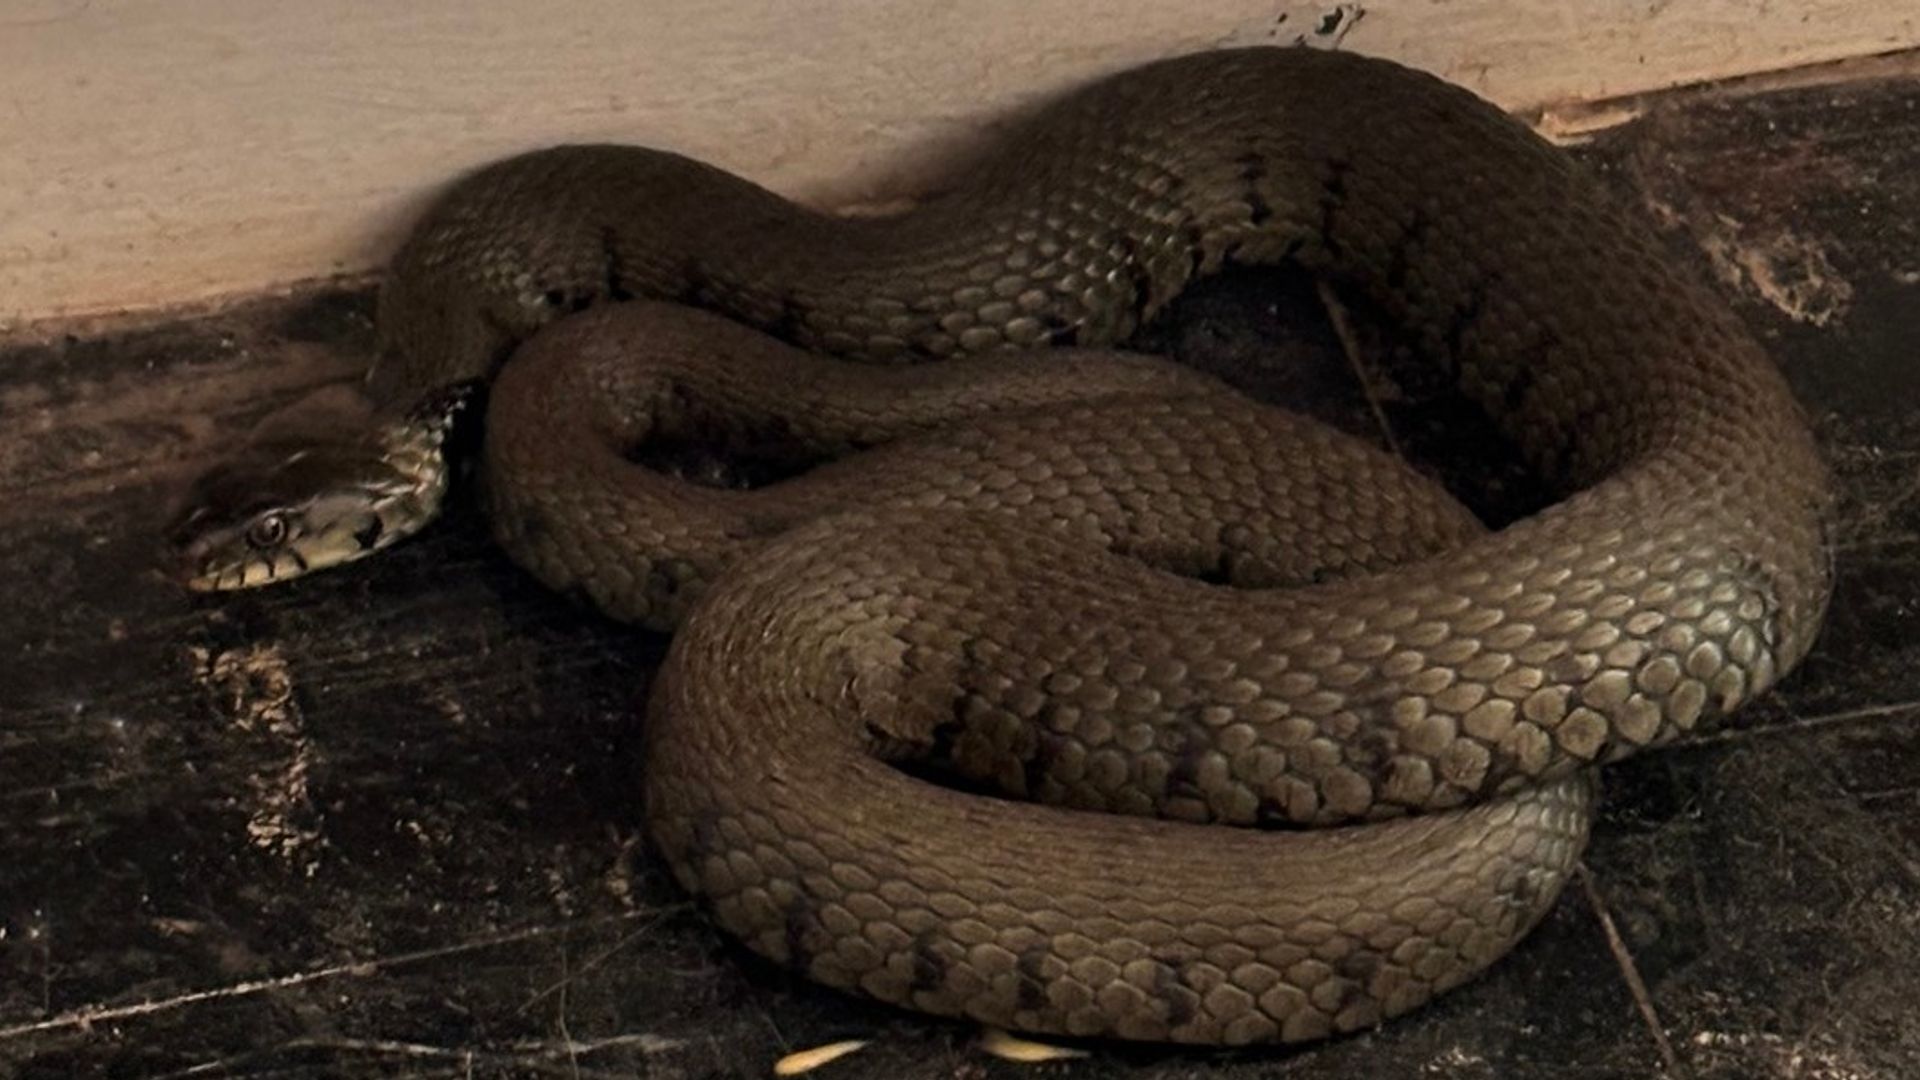 Snakes force COVID vaccination centre to close